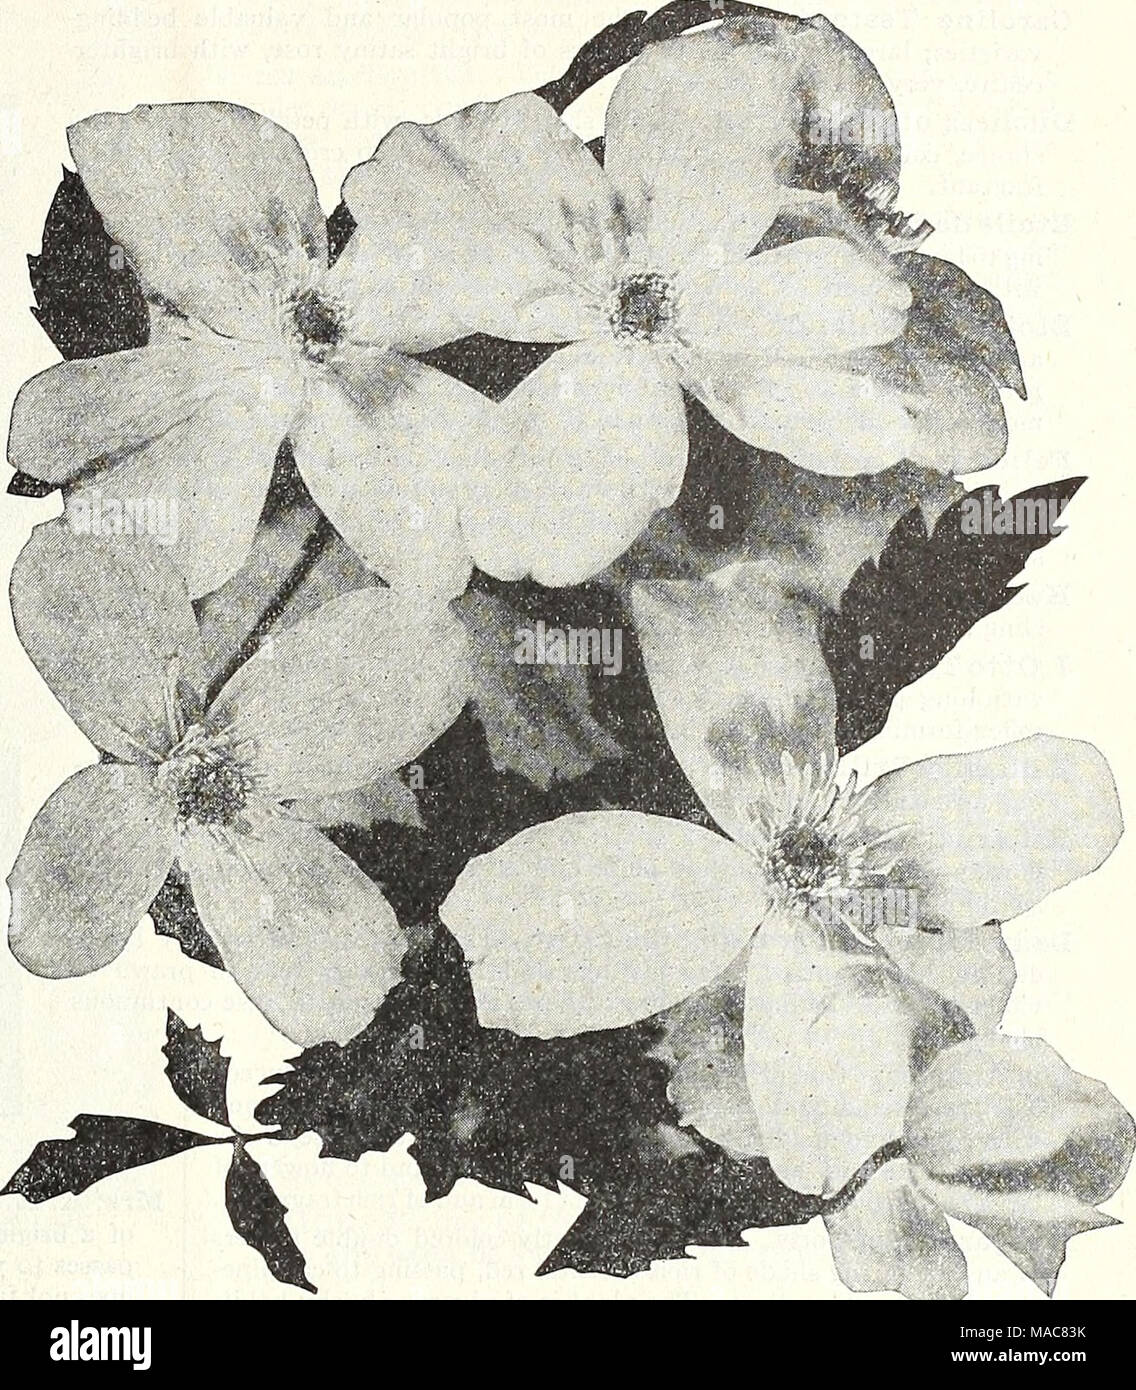 . Dreer's midsummer list 1931 . Clematis Montan. Undulata Polygonum Auberti {Silver Lace Vine). doz. Wisteria Sinensis Blue. $1.00 each. White. $1.00 each. — Venusta {Silky Wisteria). $1.00 each. 75 cts. each; $7.50 per Hardy Plants Pot Grown suitable for summer planting Abelia Chinensis Grandiflora A choice small Shrub of graceful habit, producing through the entire summer and fall white tinted lilac heather-like flowers in such abundance as to completely cover the plant. Plants from 4-inch pots, 50 cts. each. Buddleia Variabilis Magnifica (Butterfly Shrub or Summer Lilac) One of the most de Stock Photo